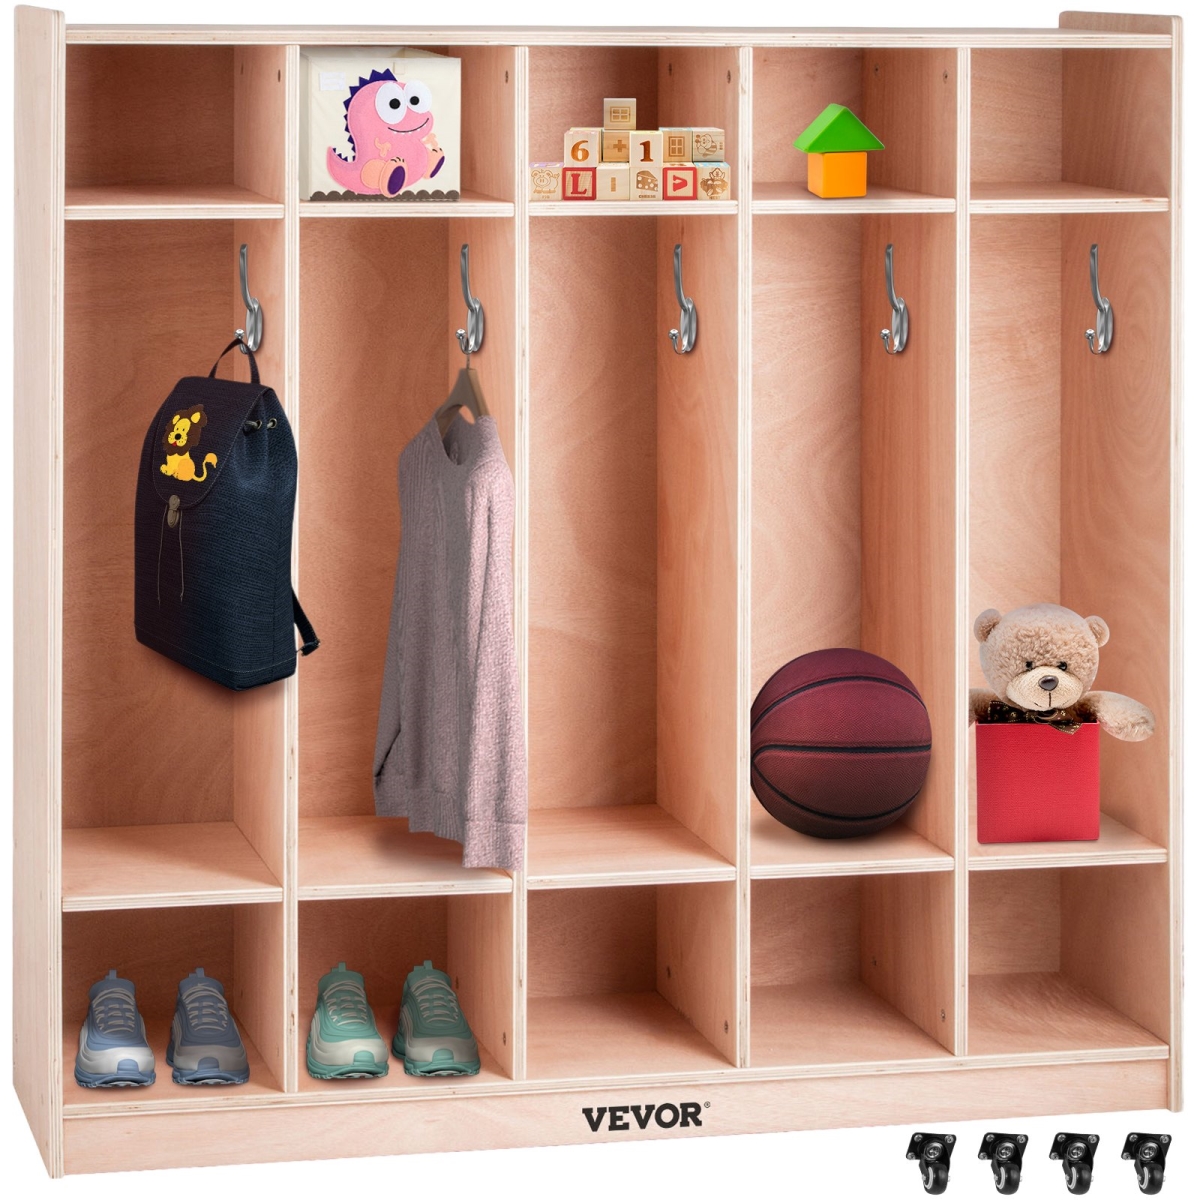 Picture of Vevor CWG5JETCWG0000001V0 Preschool Cubby 5-Section Plywood Birch Locker